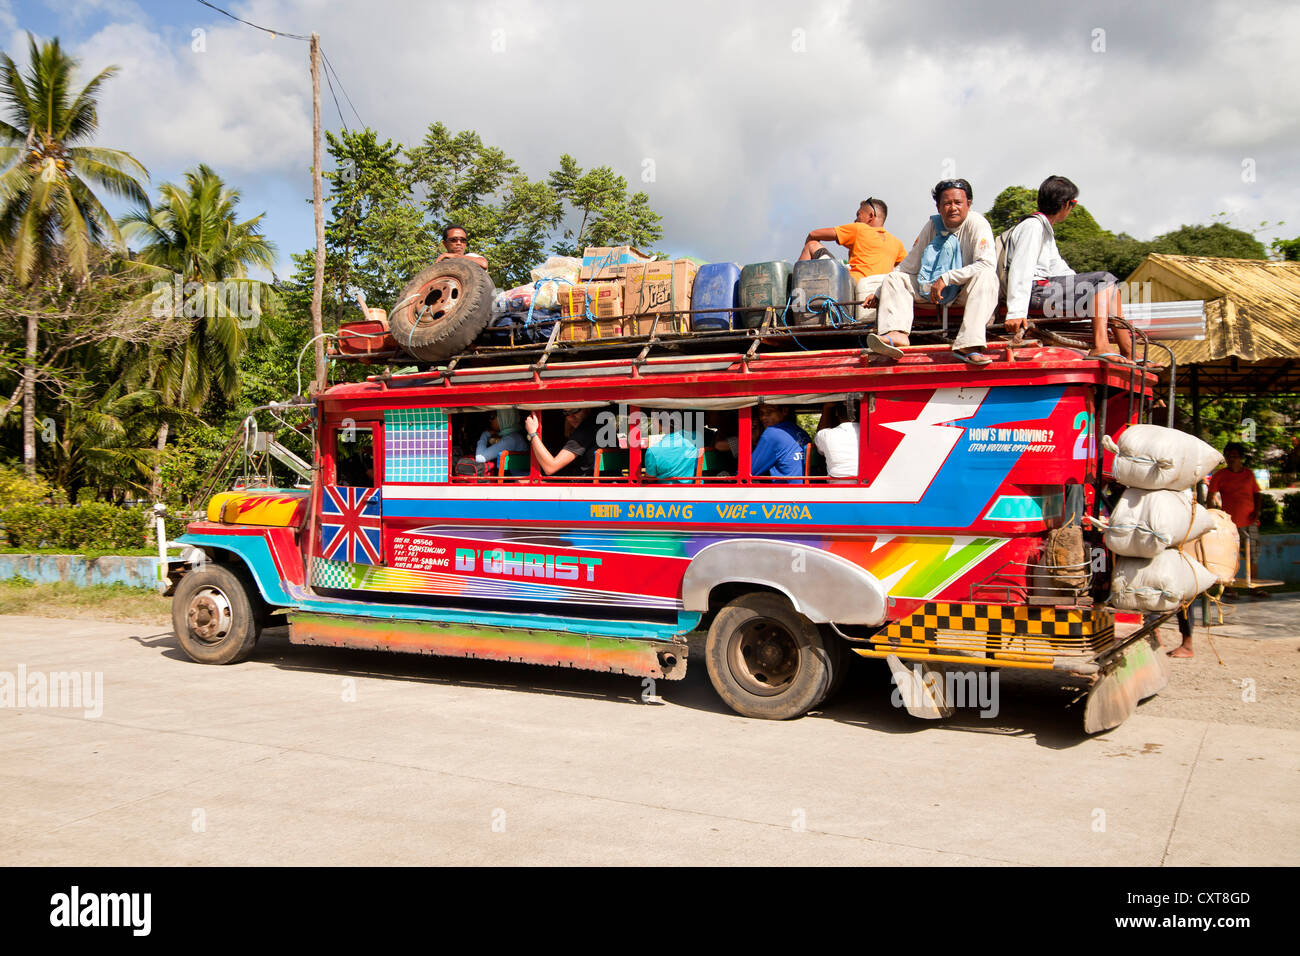 Fully loaded Jeepney, responsible for public transportation in the Philippines, Sabang, Palawan, Philippines, Asia Stock Photo